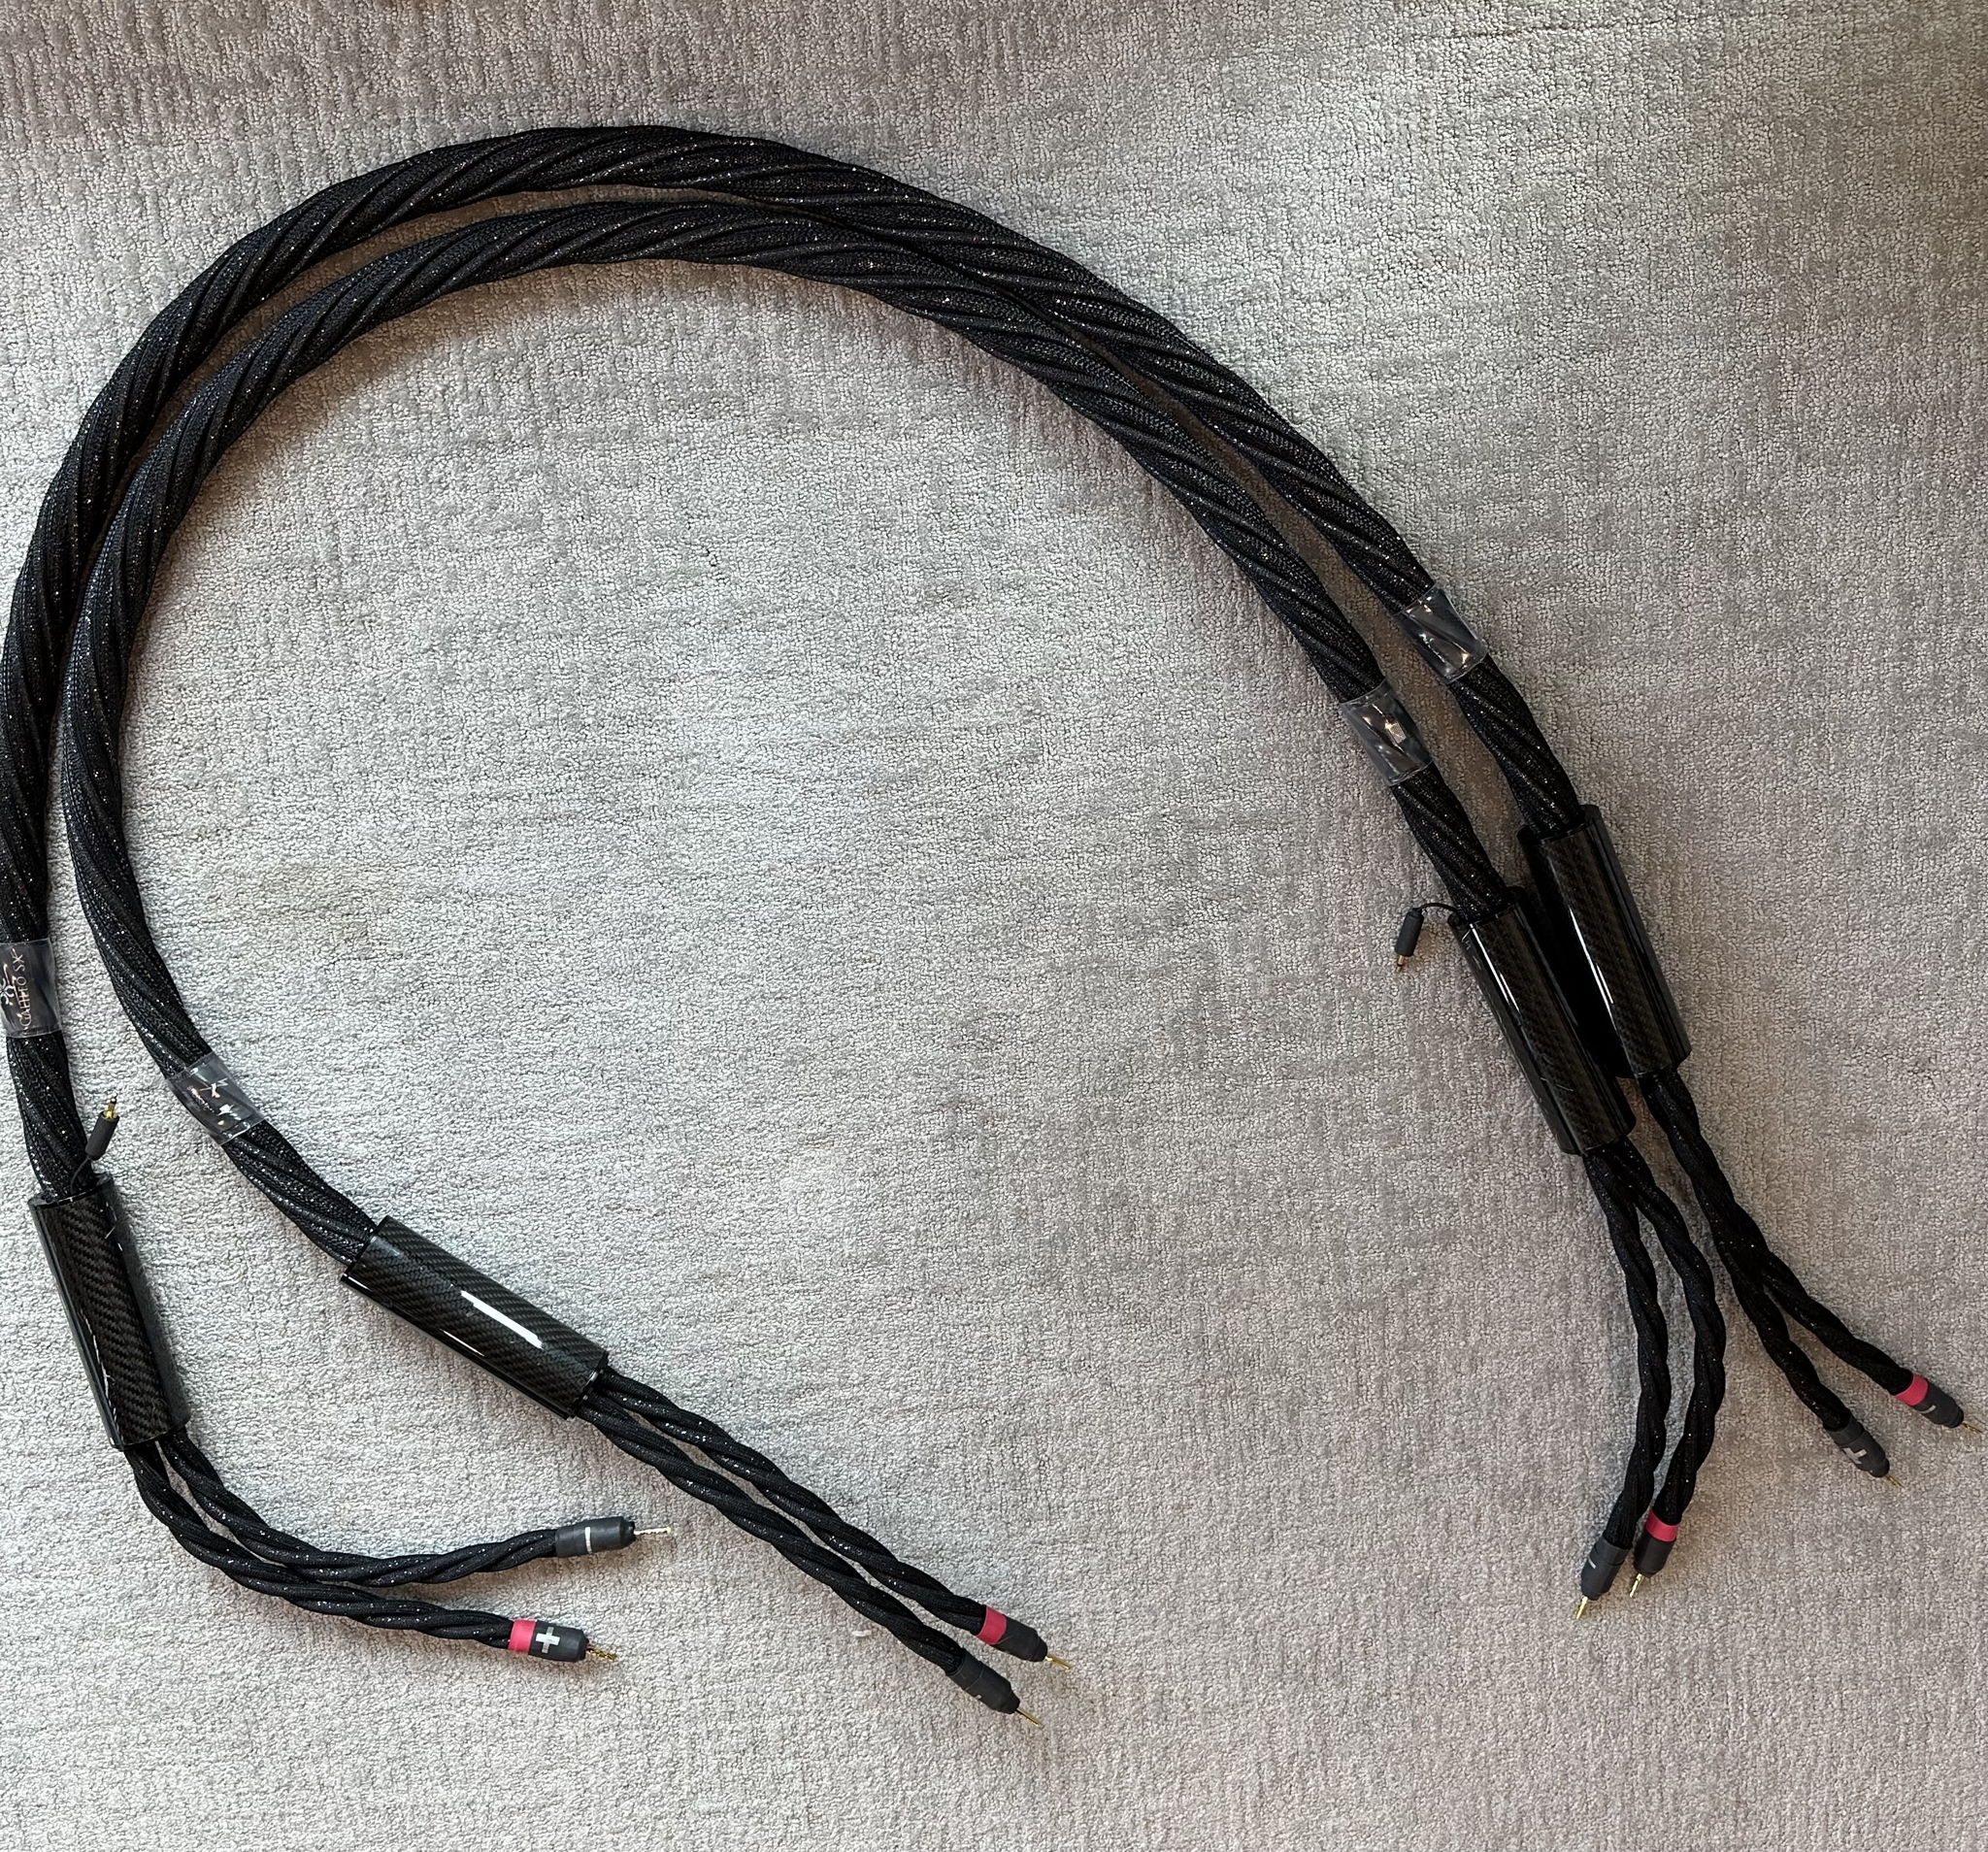 Synergistic Research Galileo SX Speaker Cable (8 feet) 4